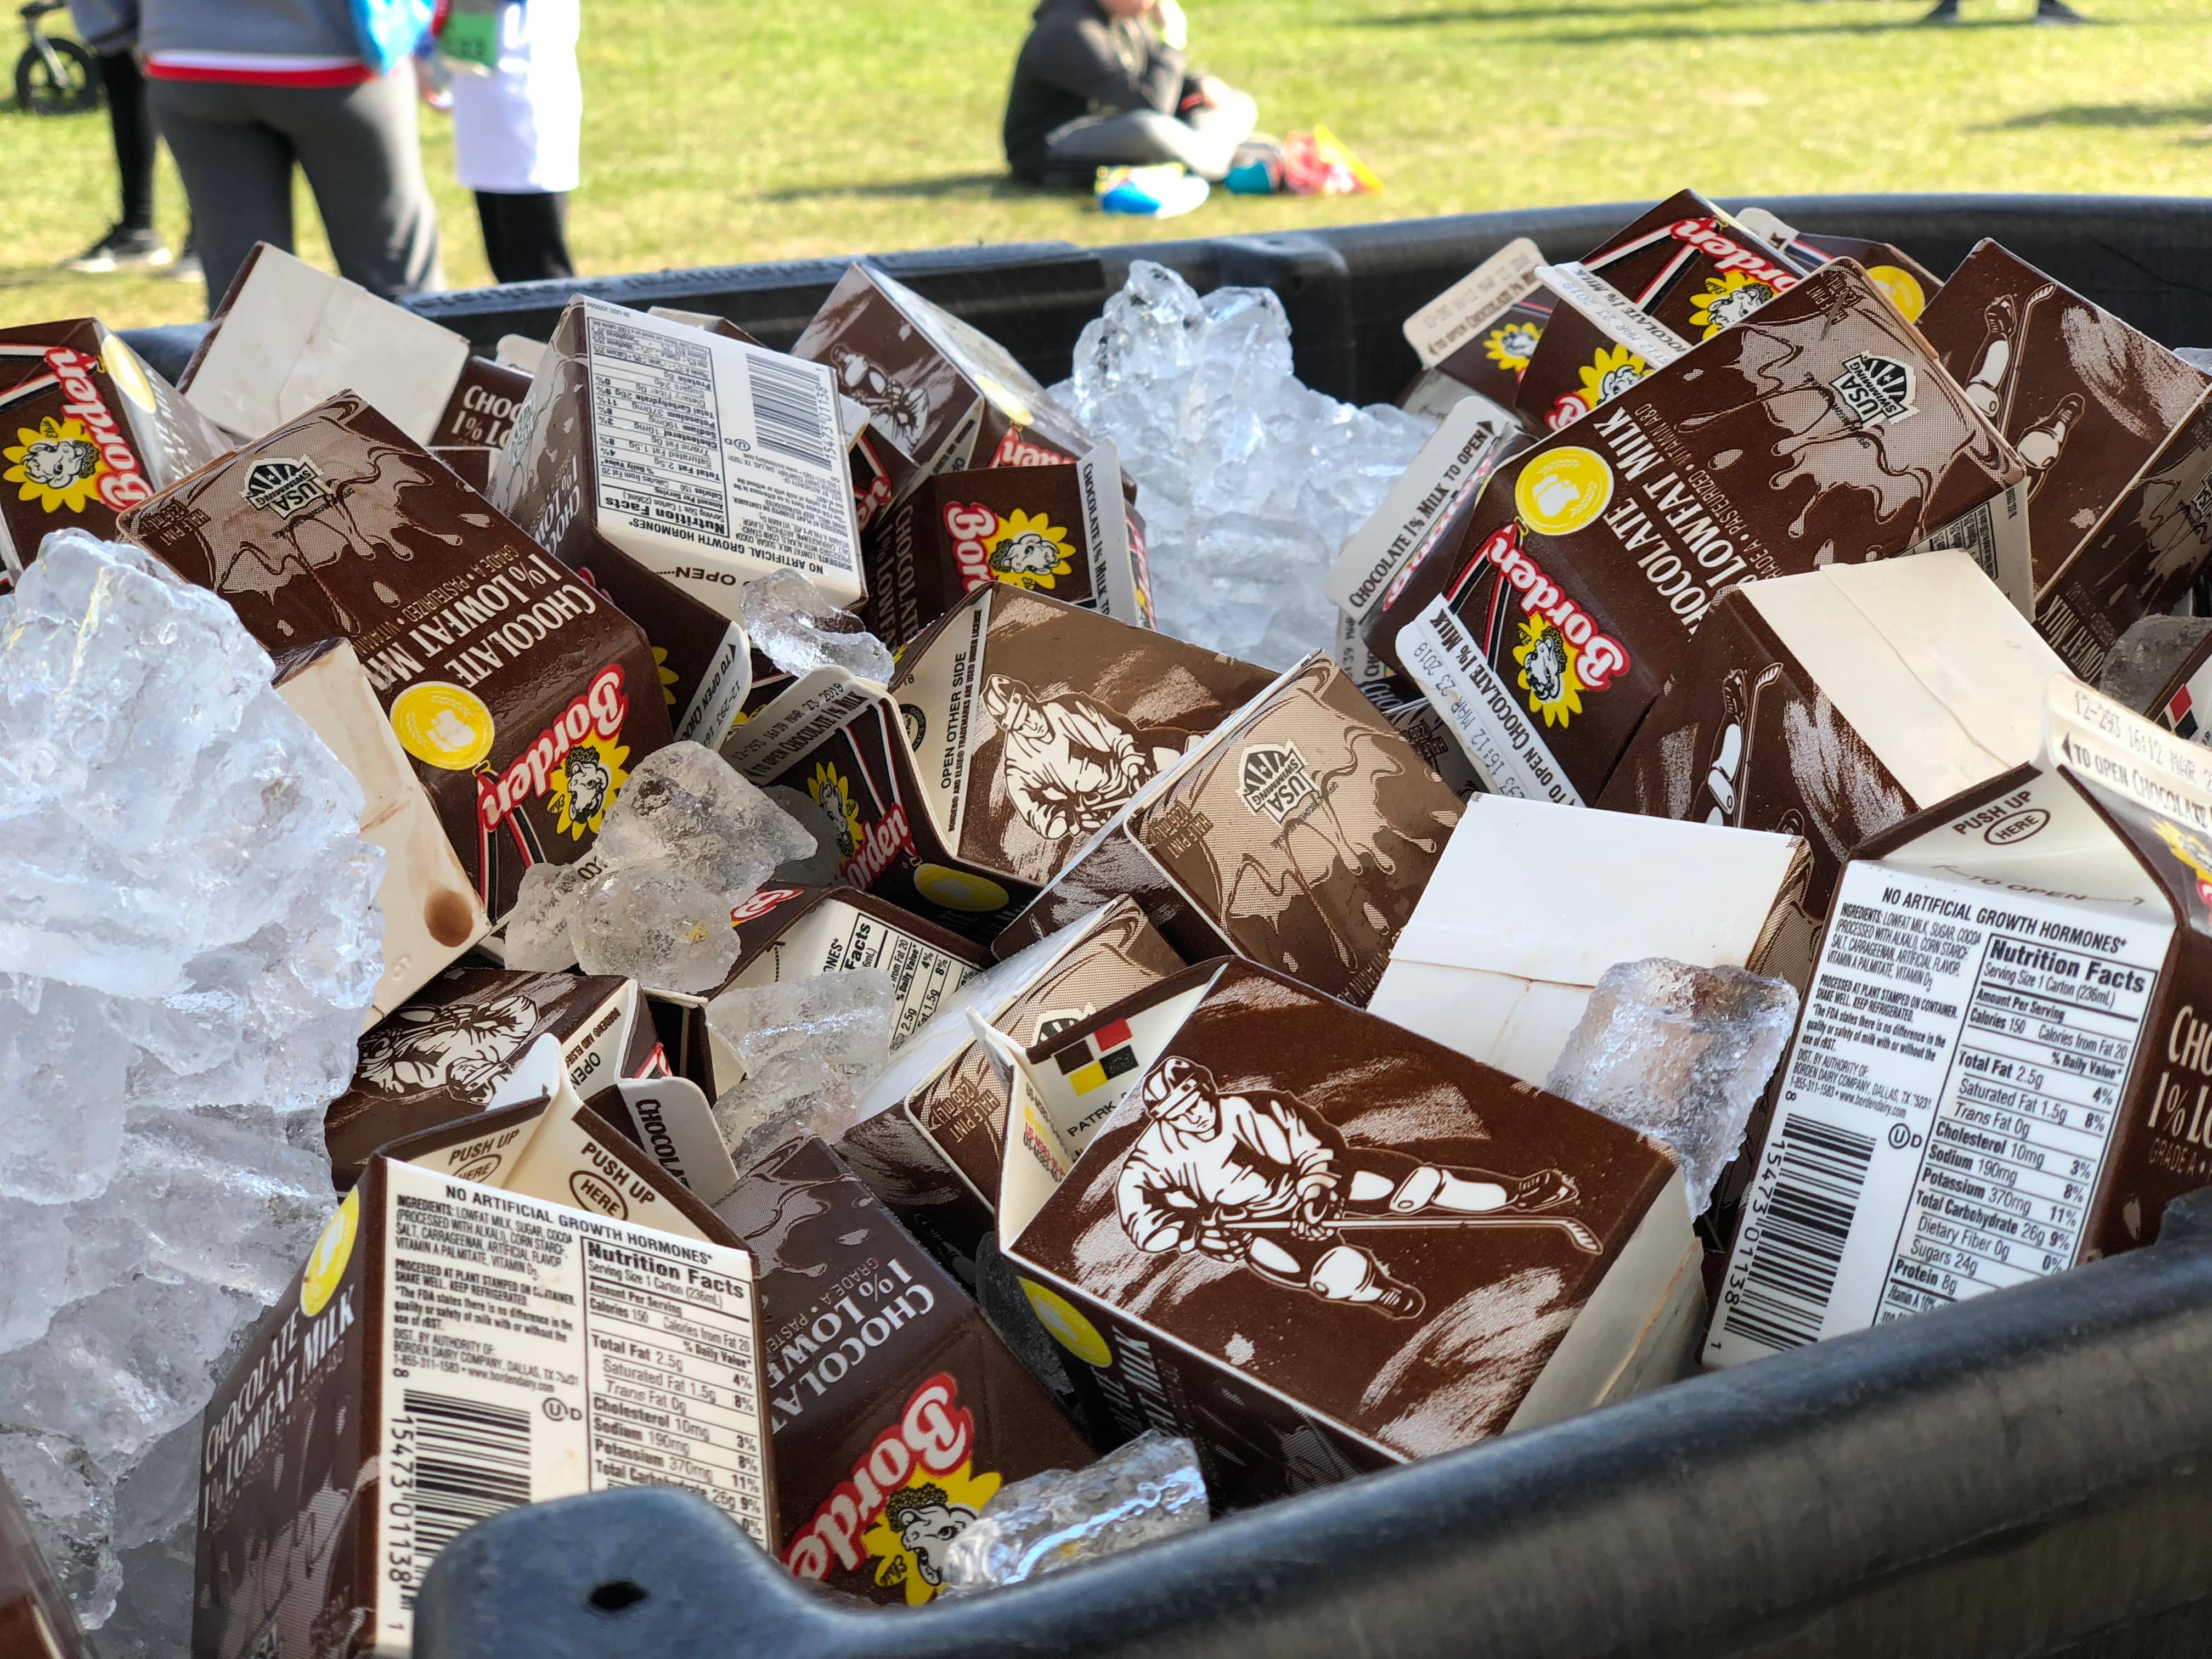 cartons of chocolate milk in an ice tub